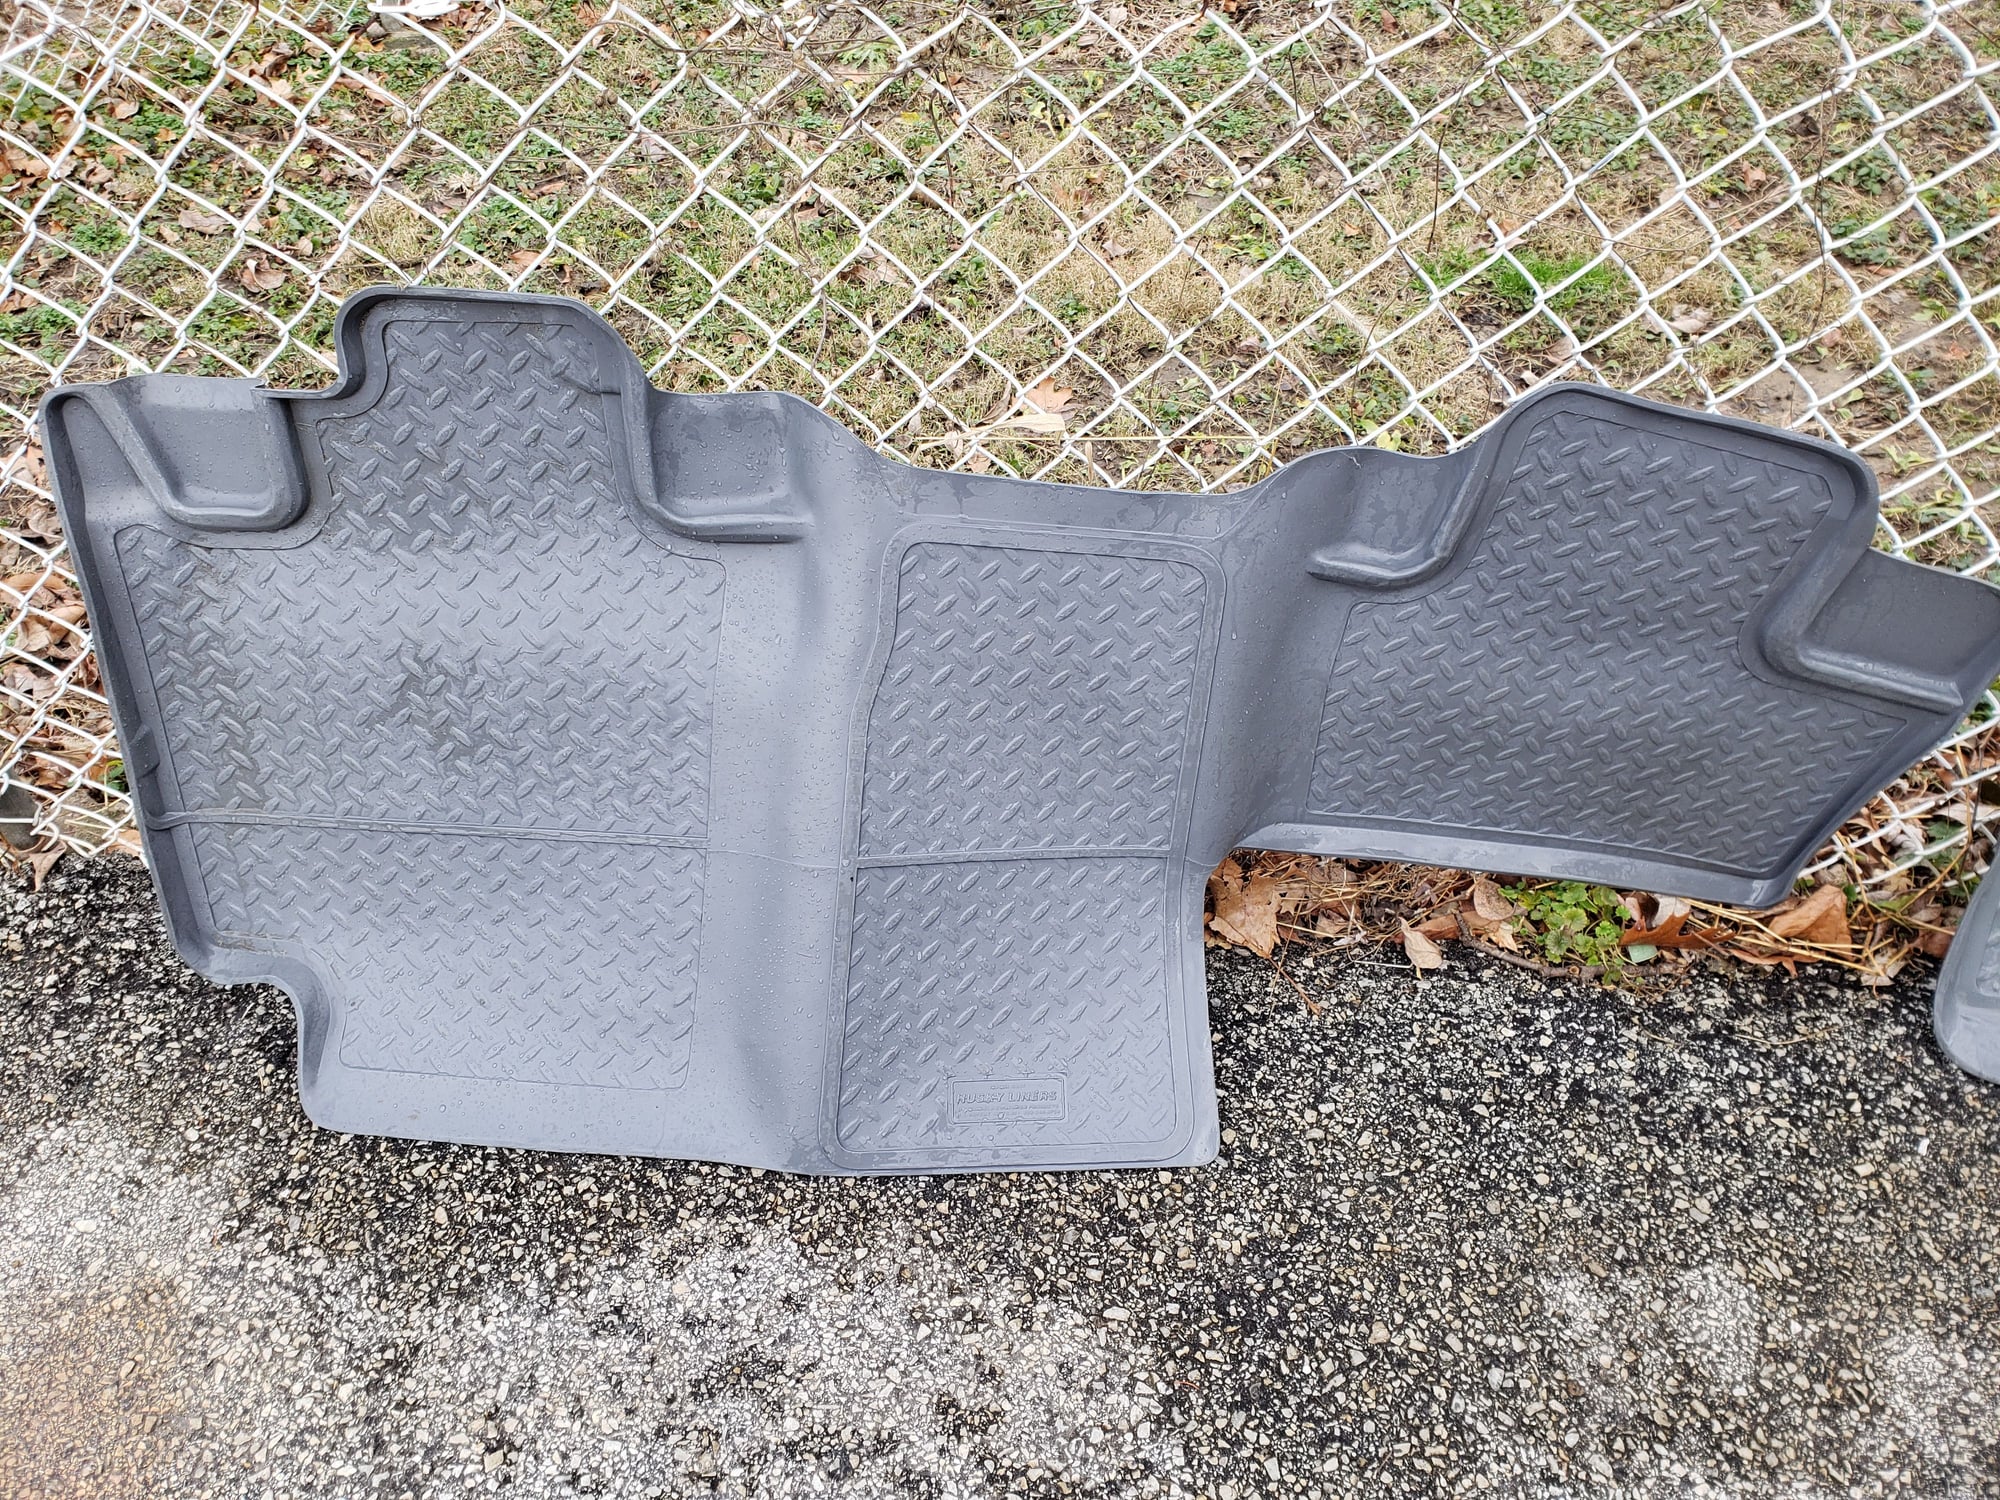 Miscellaneous - 2004-2007 F-150 F150 Husky Floor Liners / Floor Mats Super Crew - Used - 2004 to 2007 Ford F-150 - Brookhaven, PA 19015, United States